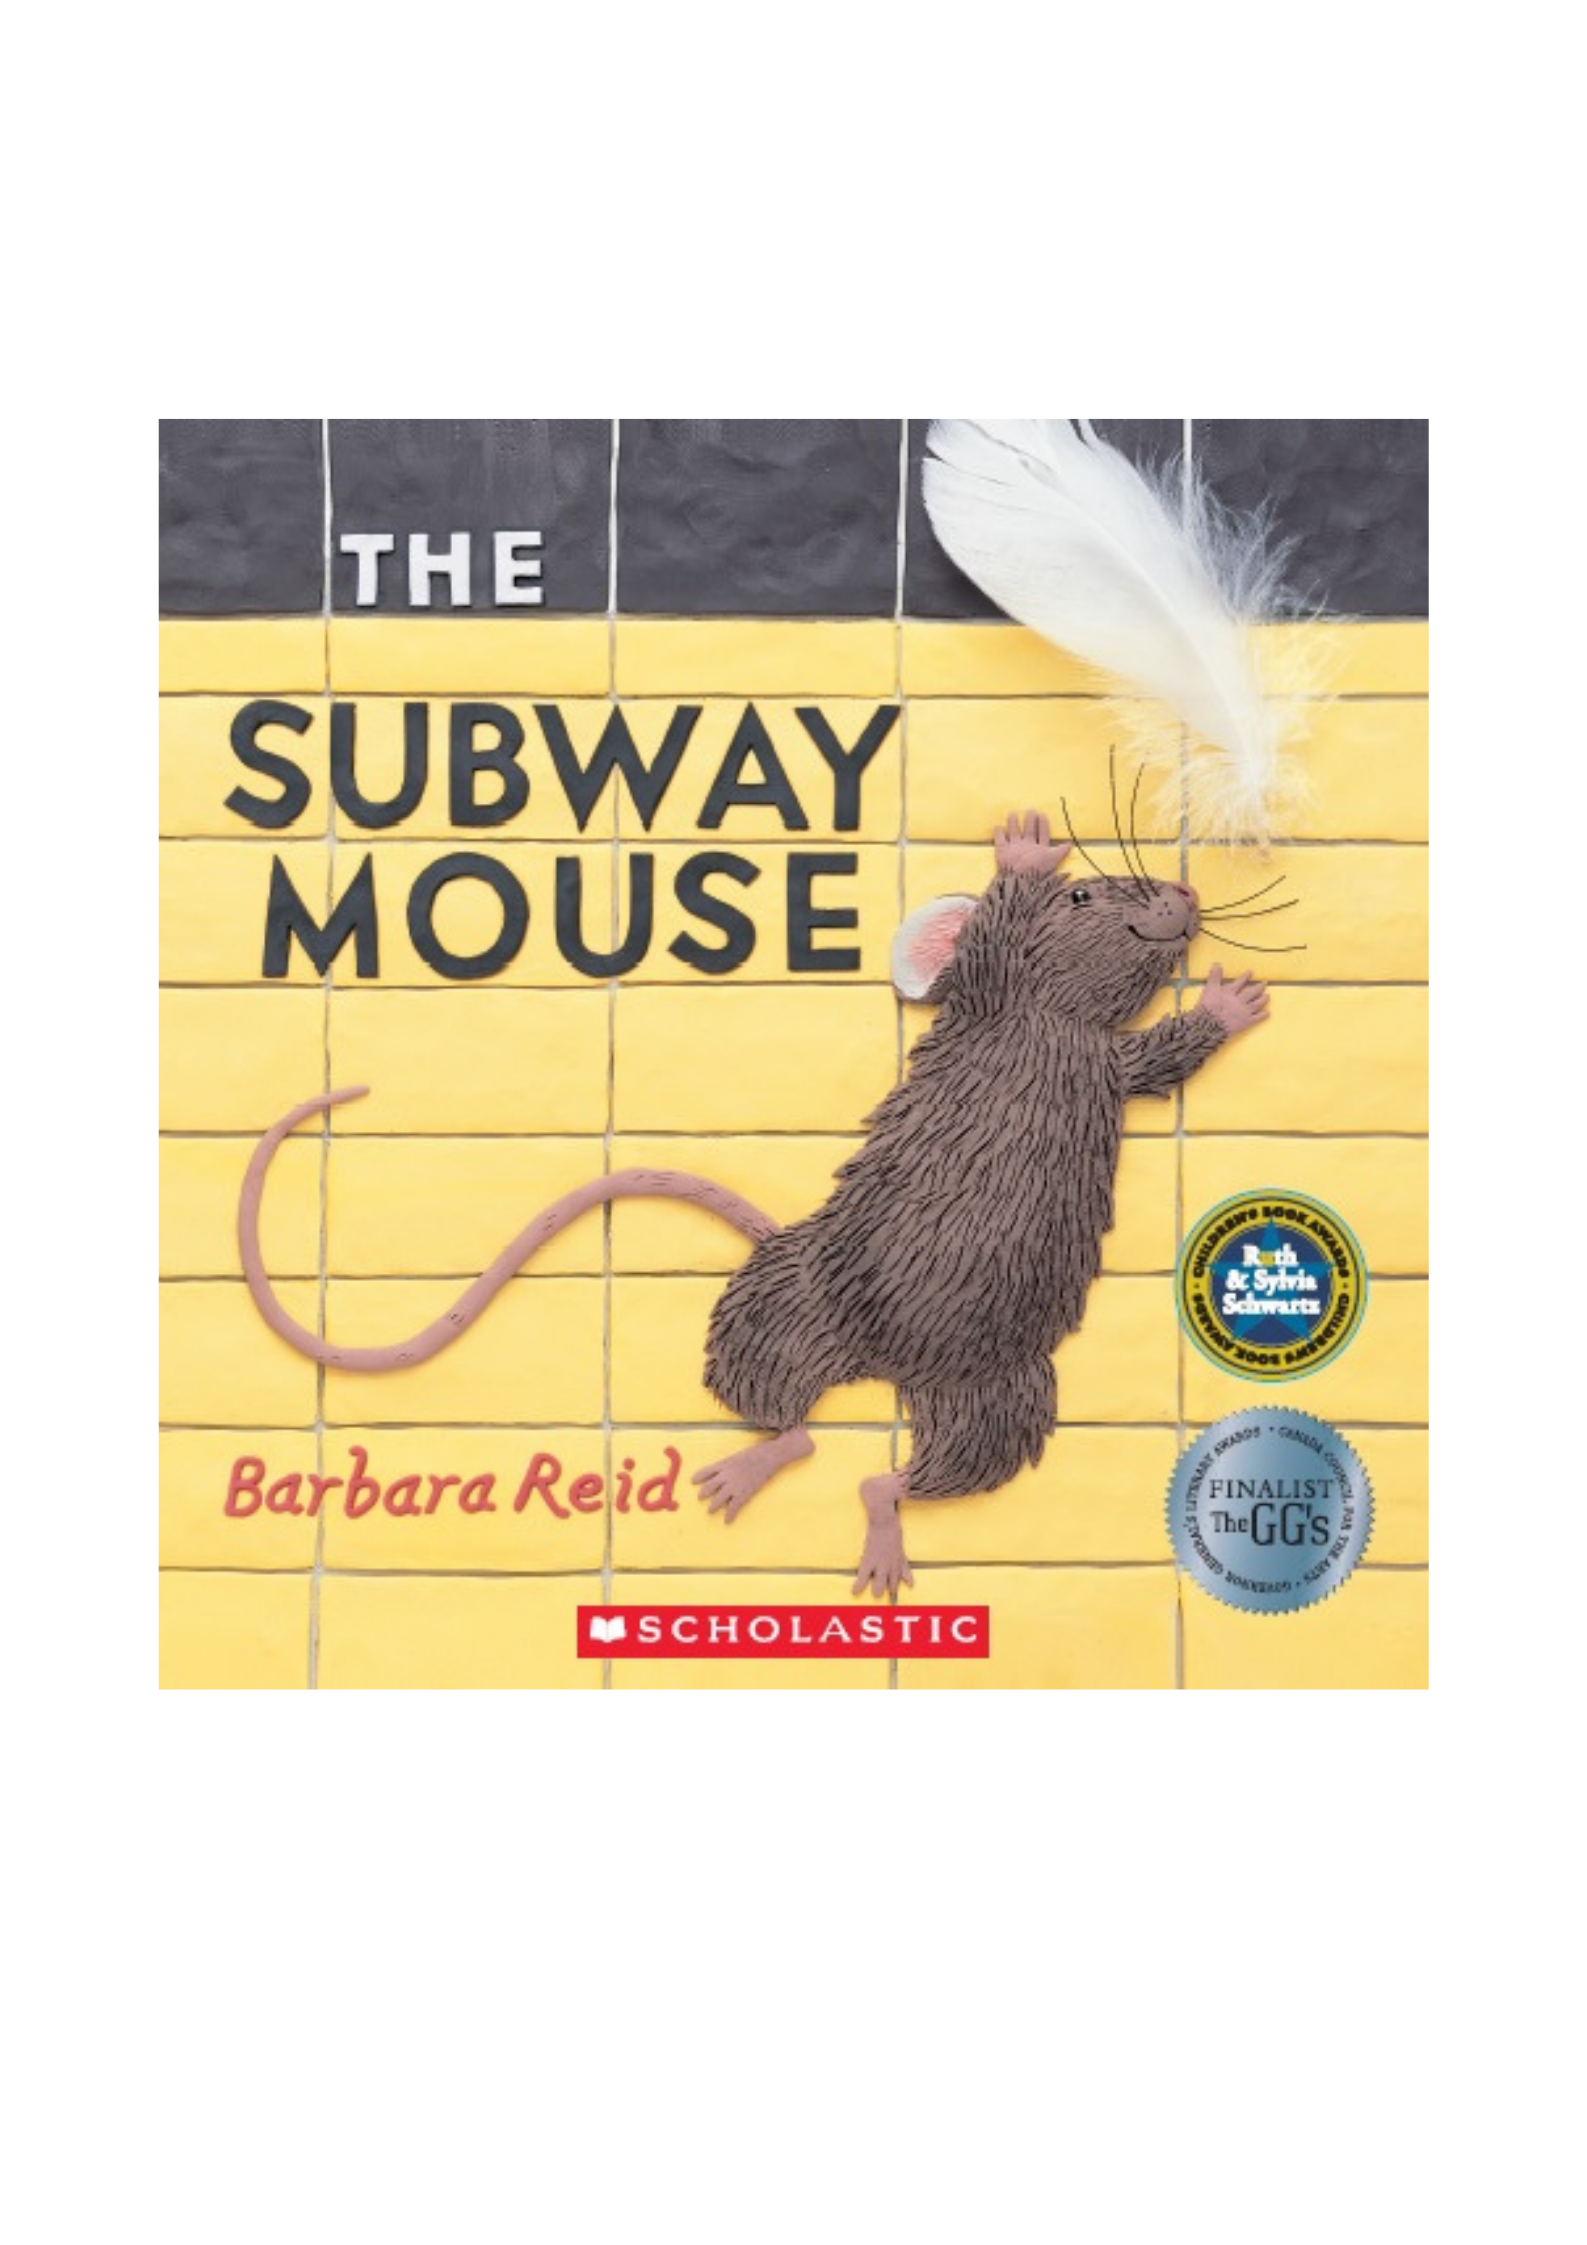 Subway Mouse